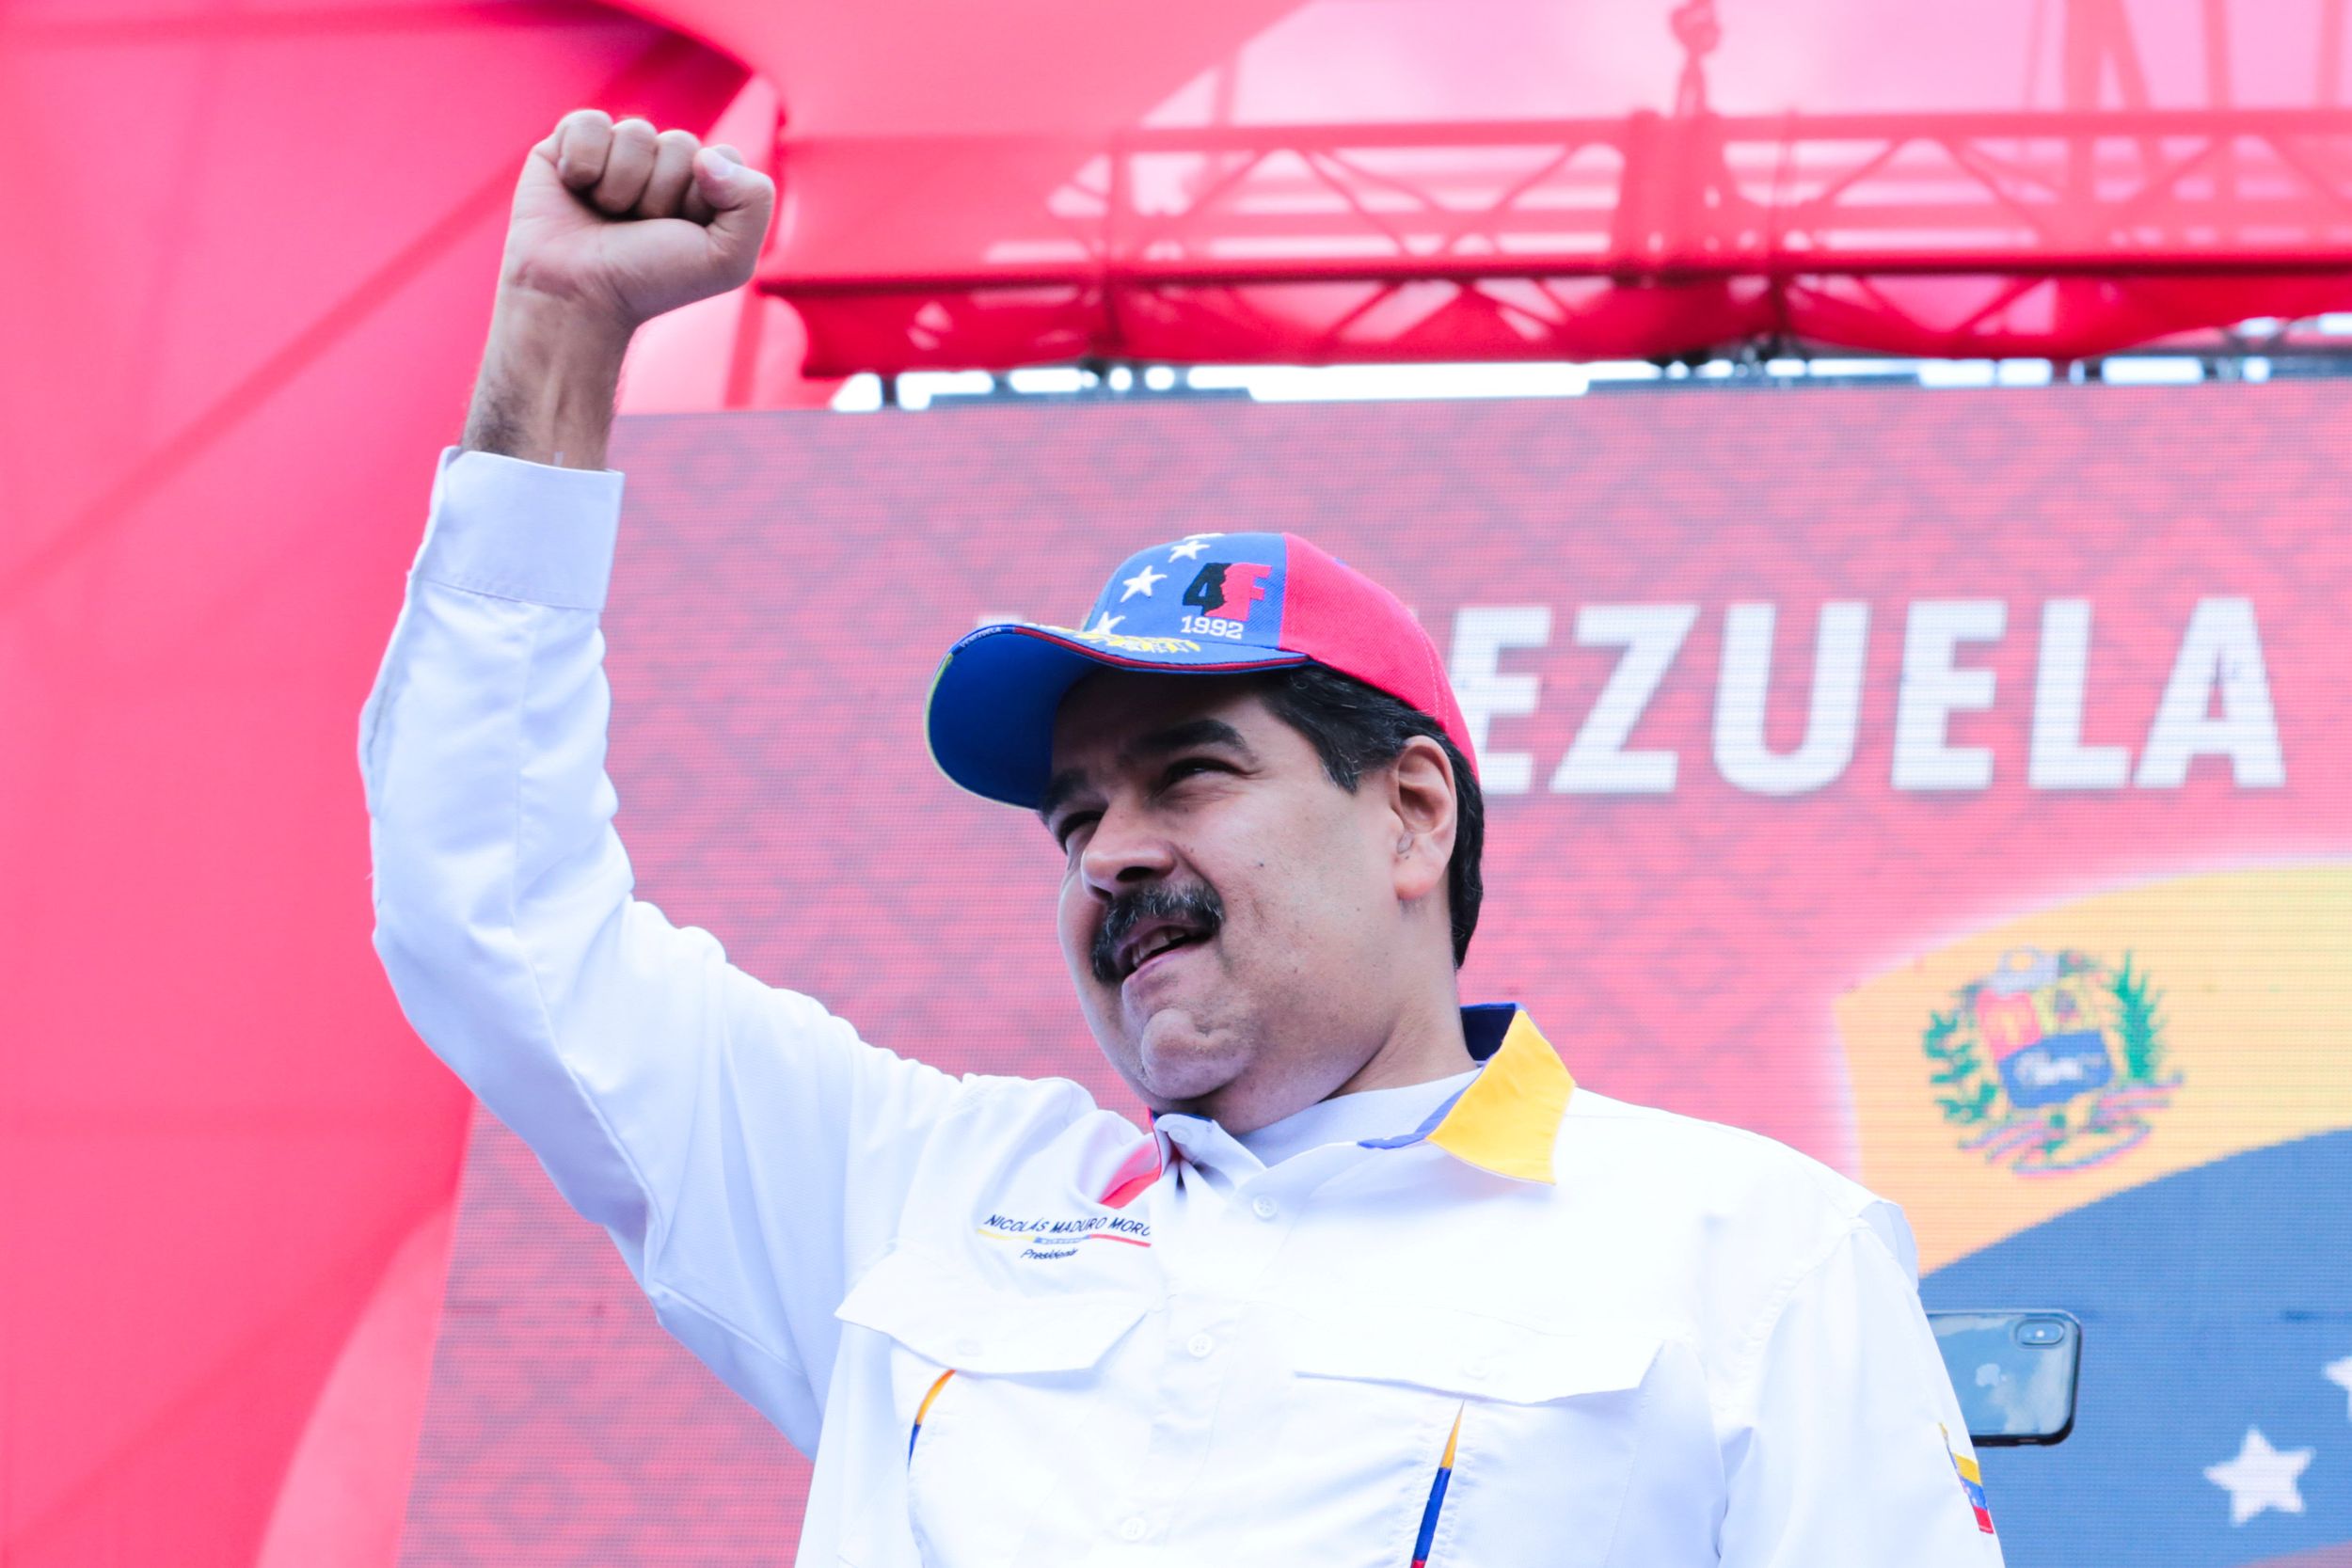 MADURO ON THE OFFENSIVE?